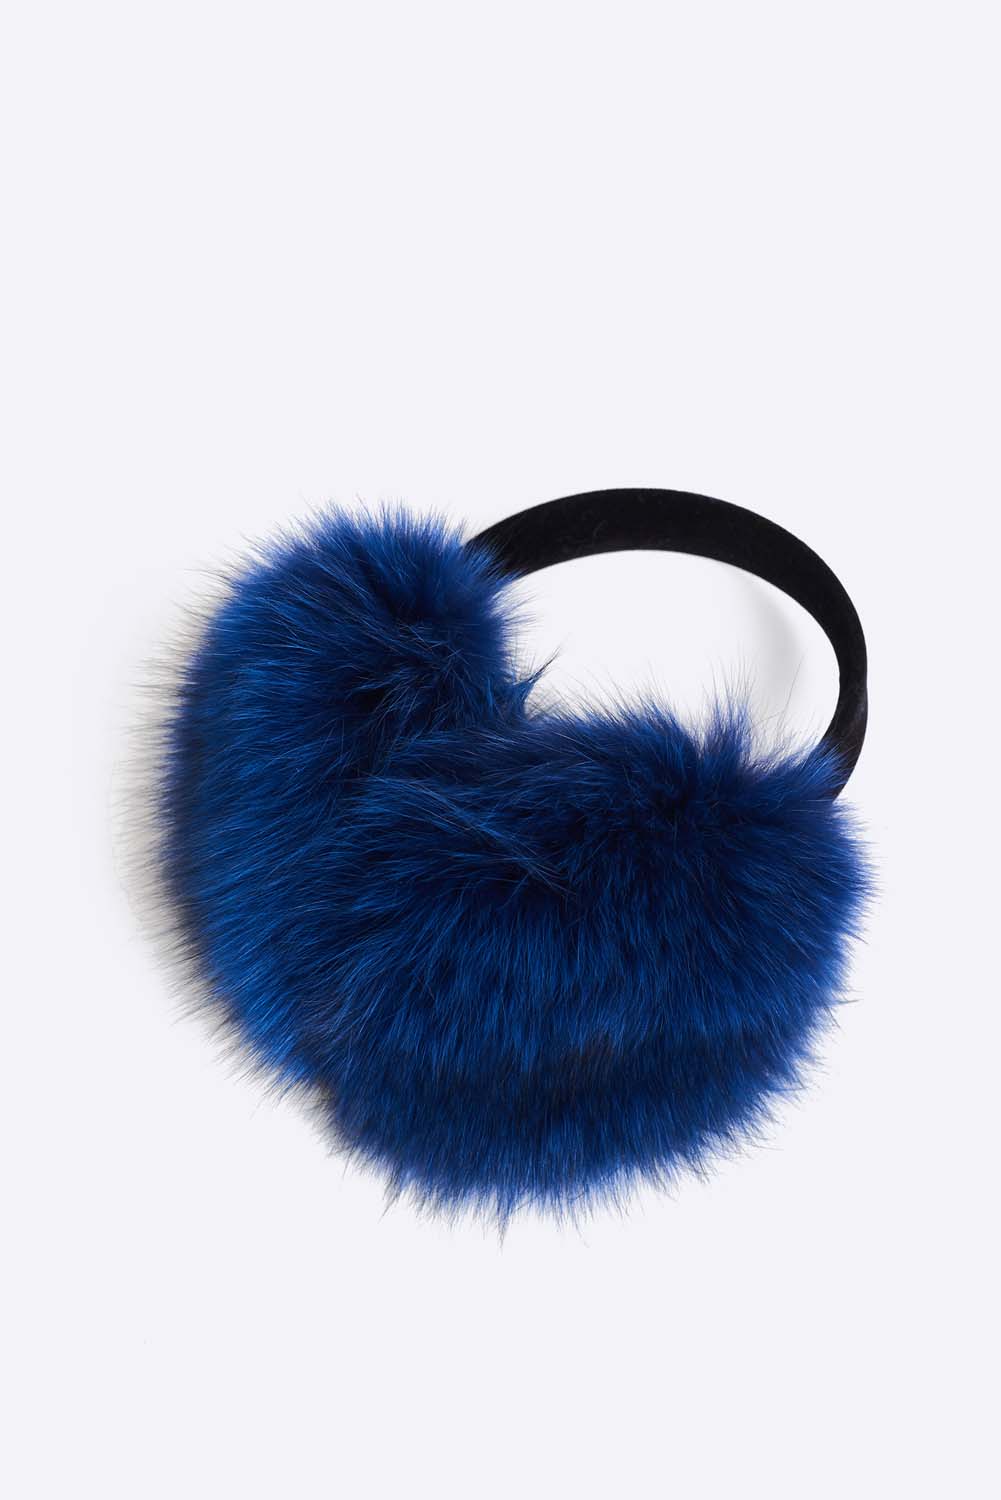 Classic upcycled fox fur earmuffs. Ultra soft and warm earmuffs. They have a polyester lining and velvet trim. Cut, dyed and stitched by hand. Hand made in Montreal. 